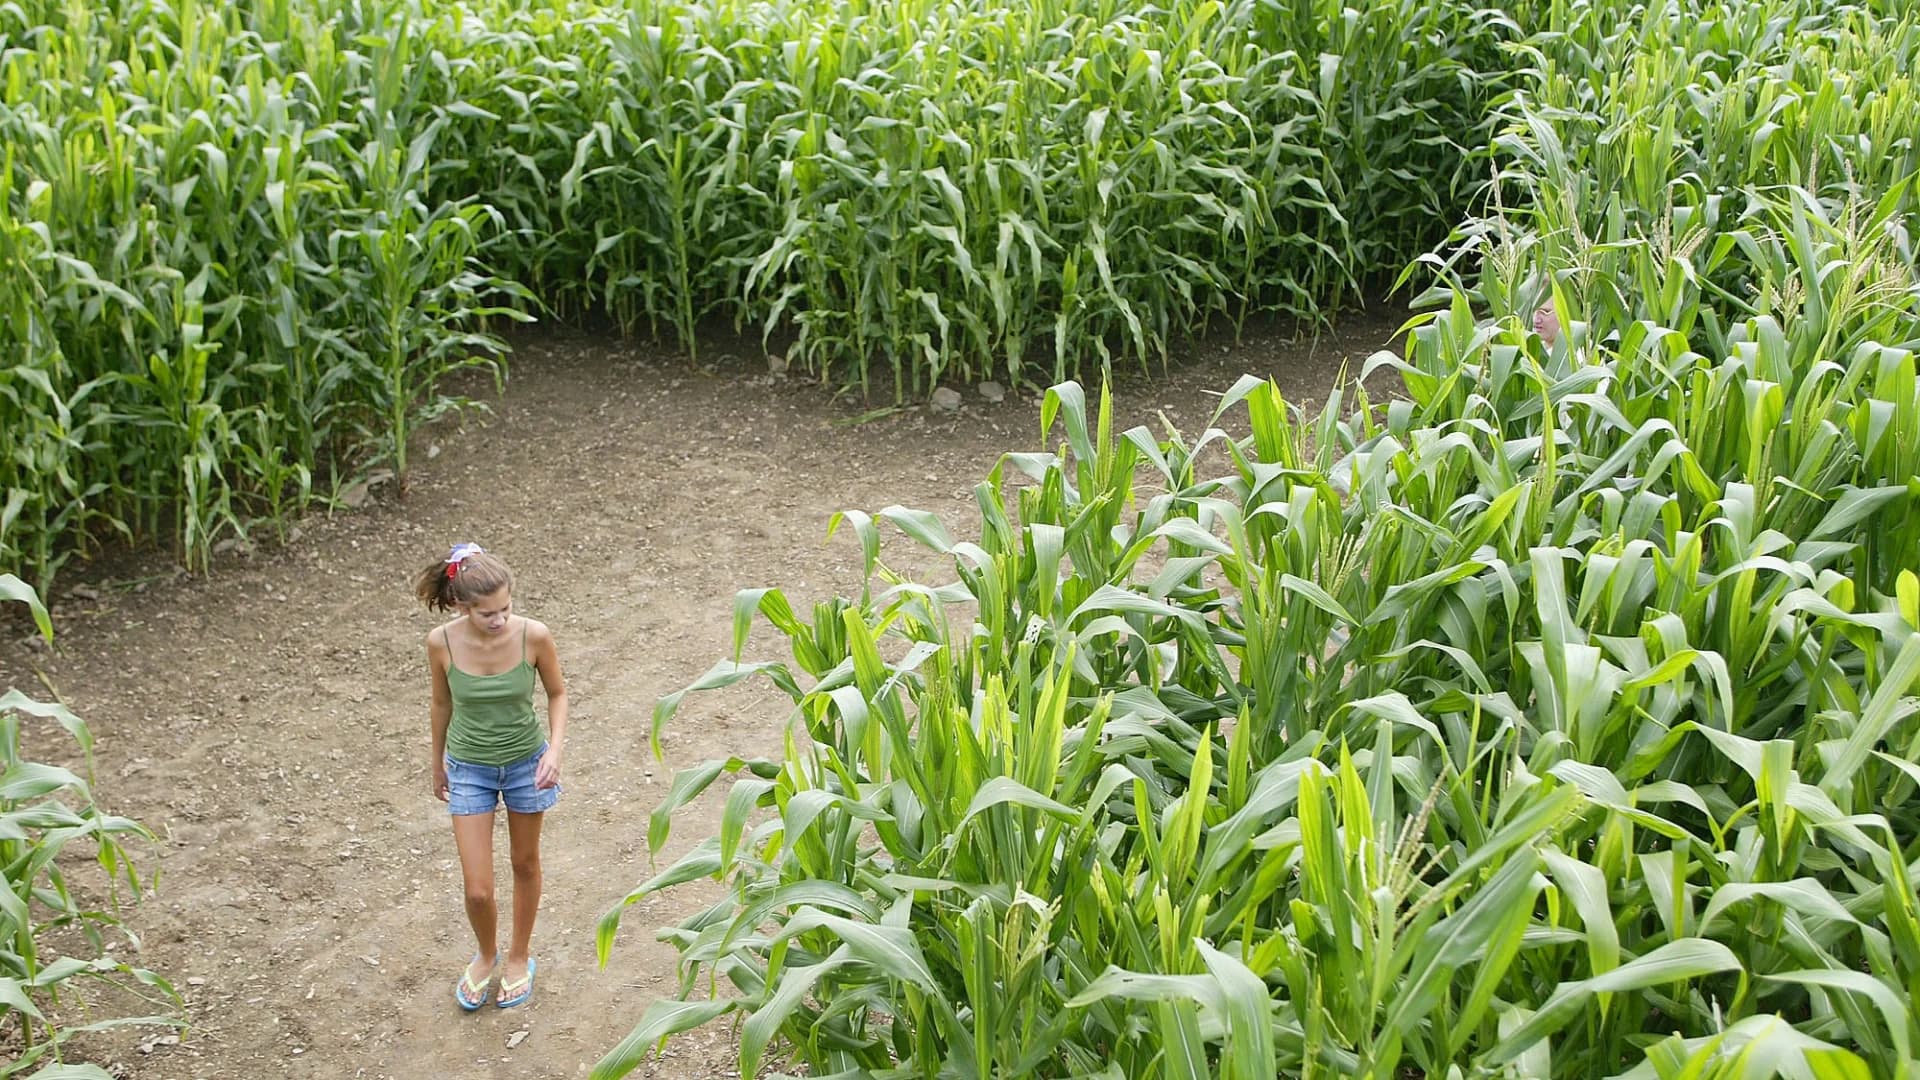 Guide: Get lost in these cornfield mazes around Long Island